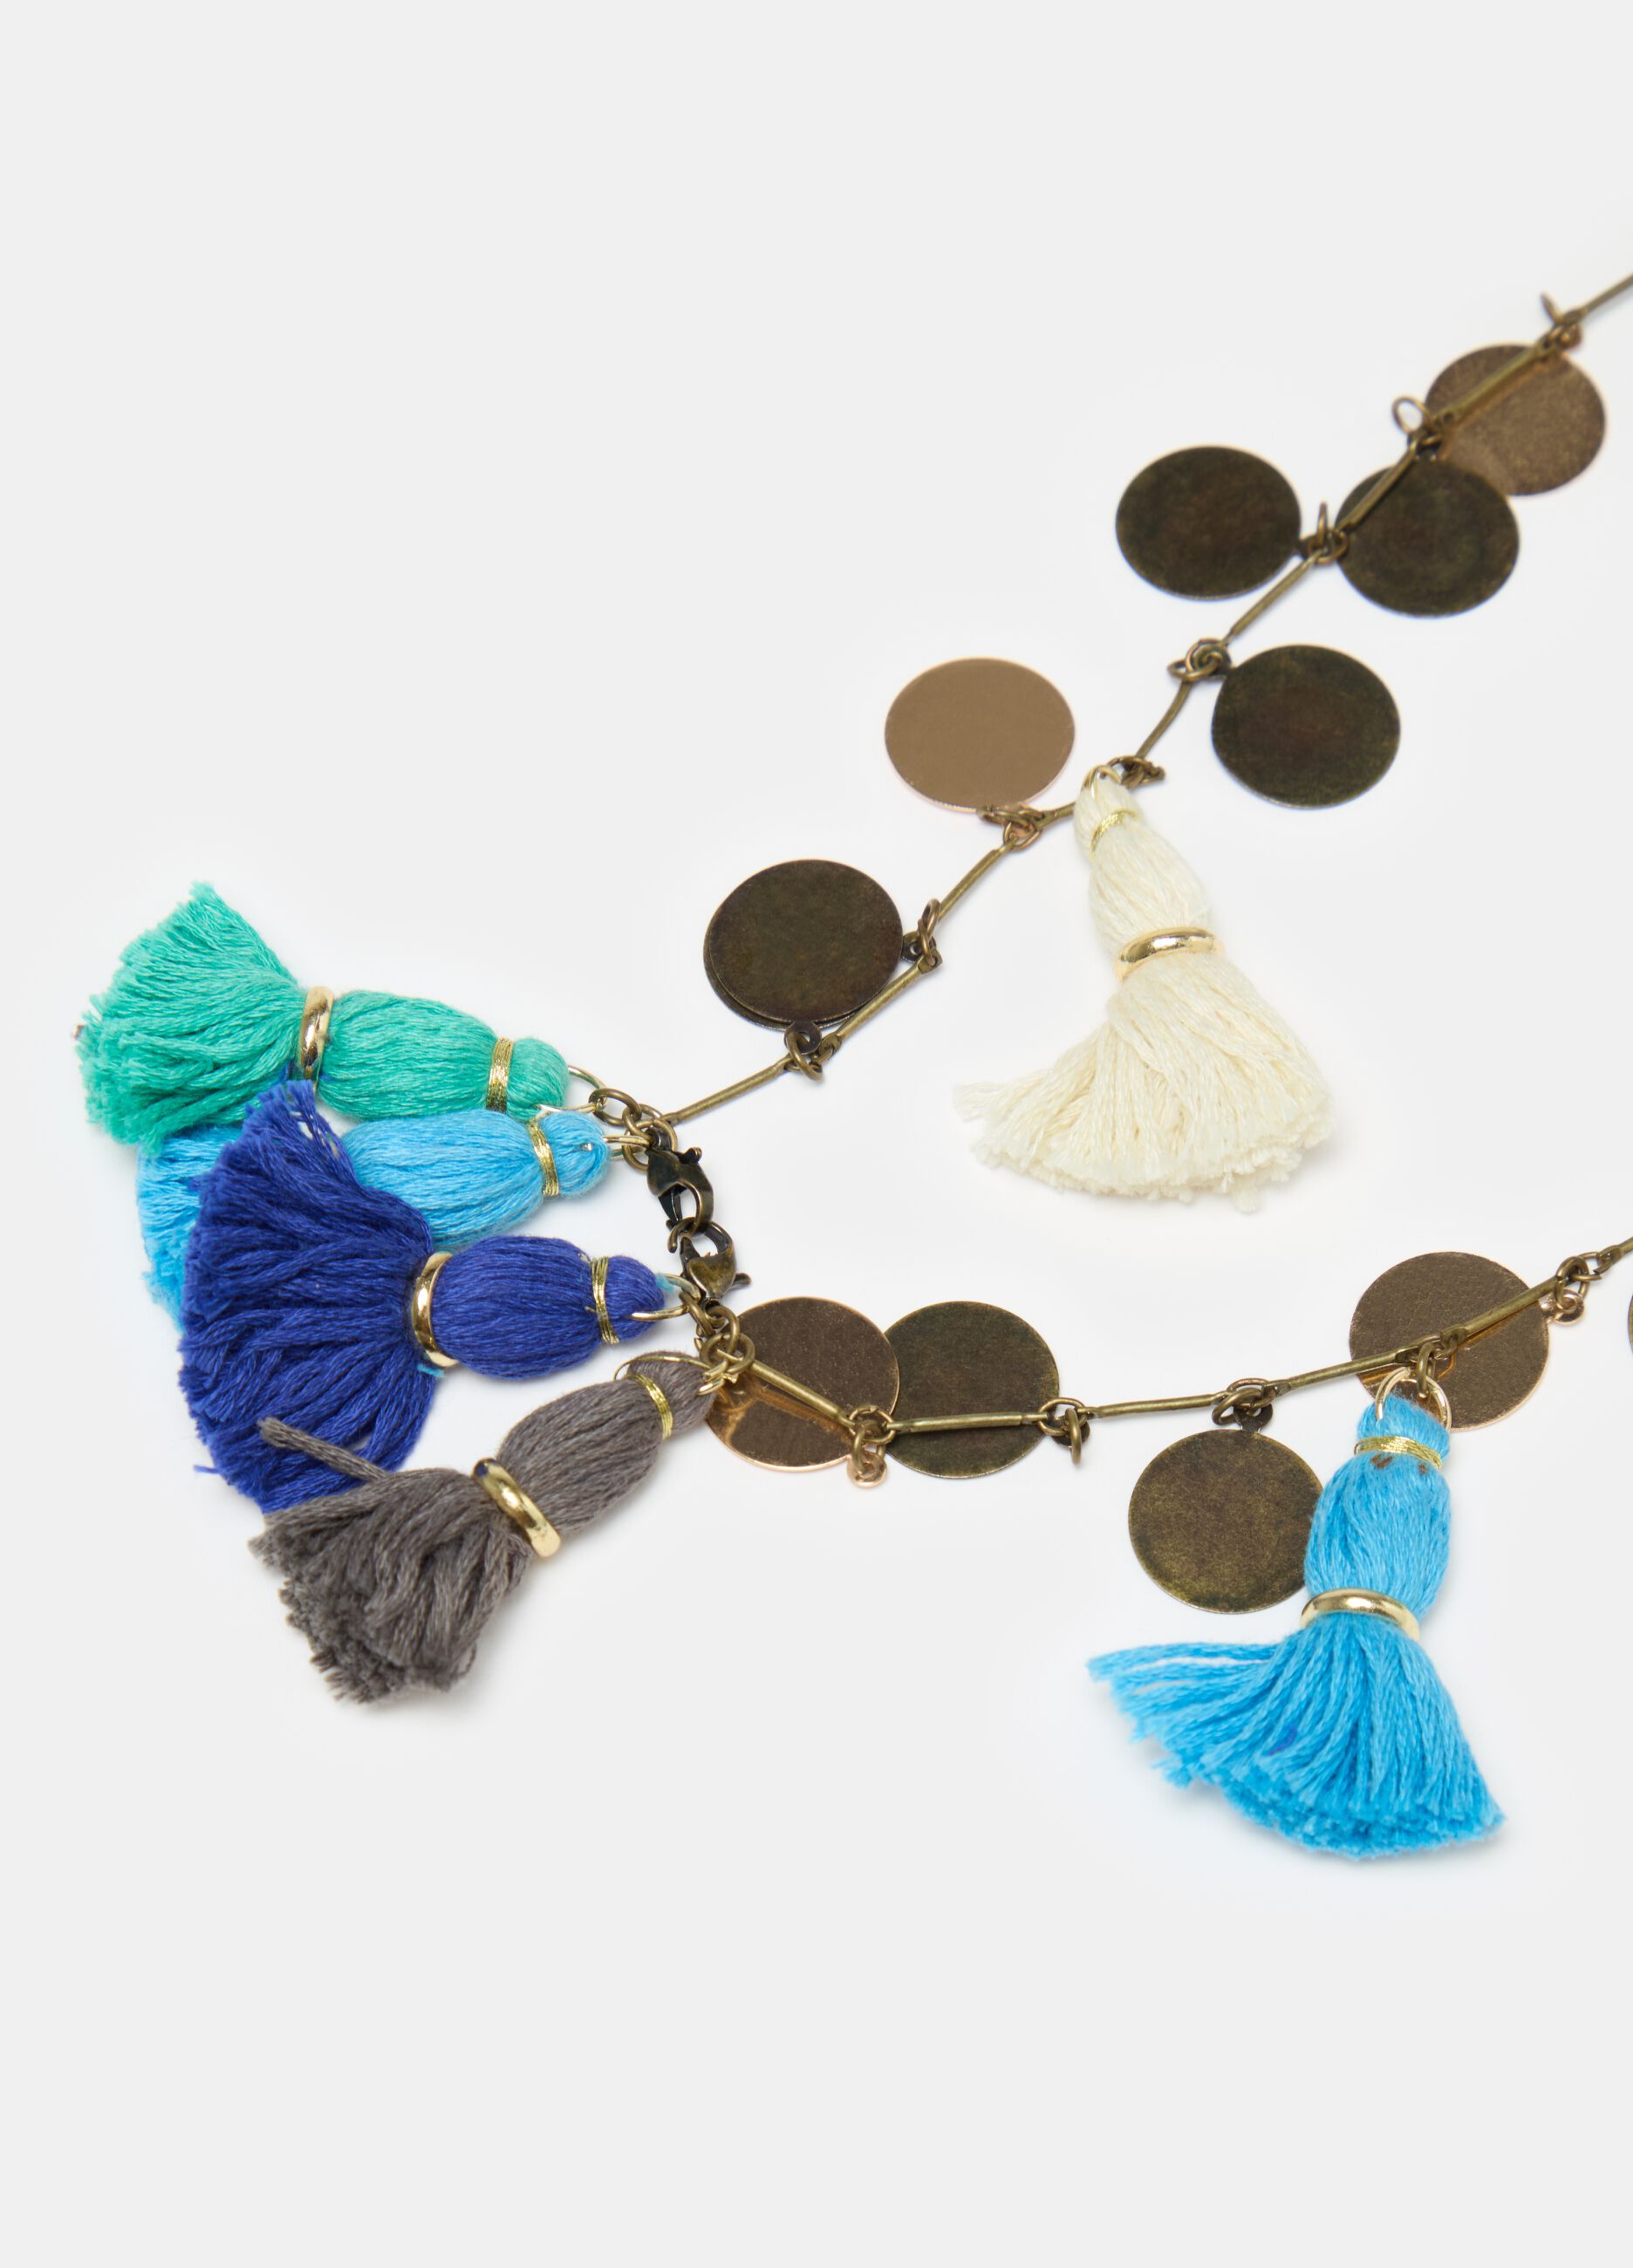 Necklace with tassels and small circles